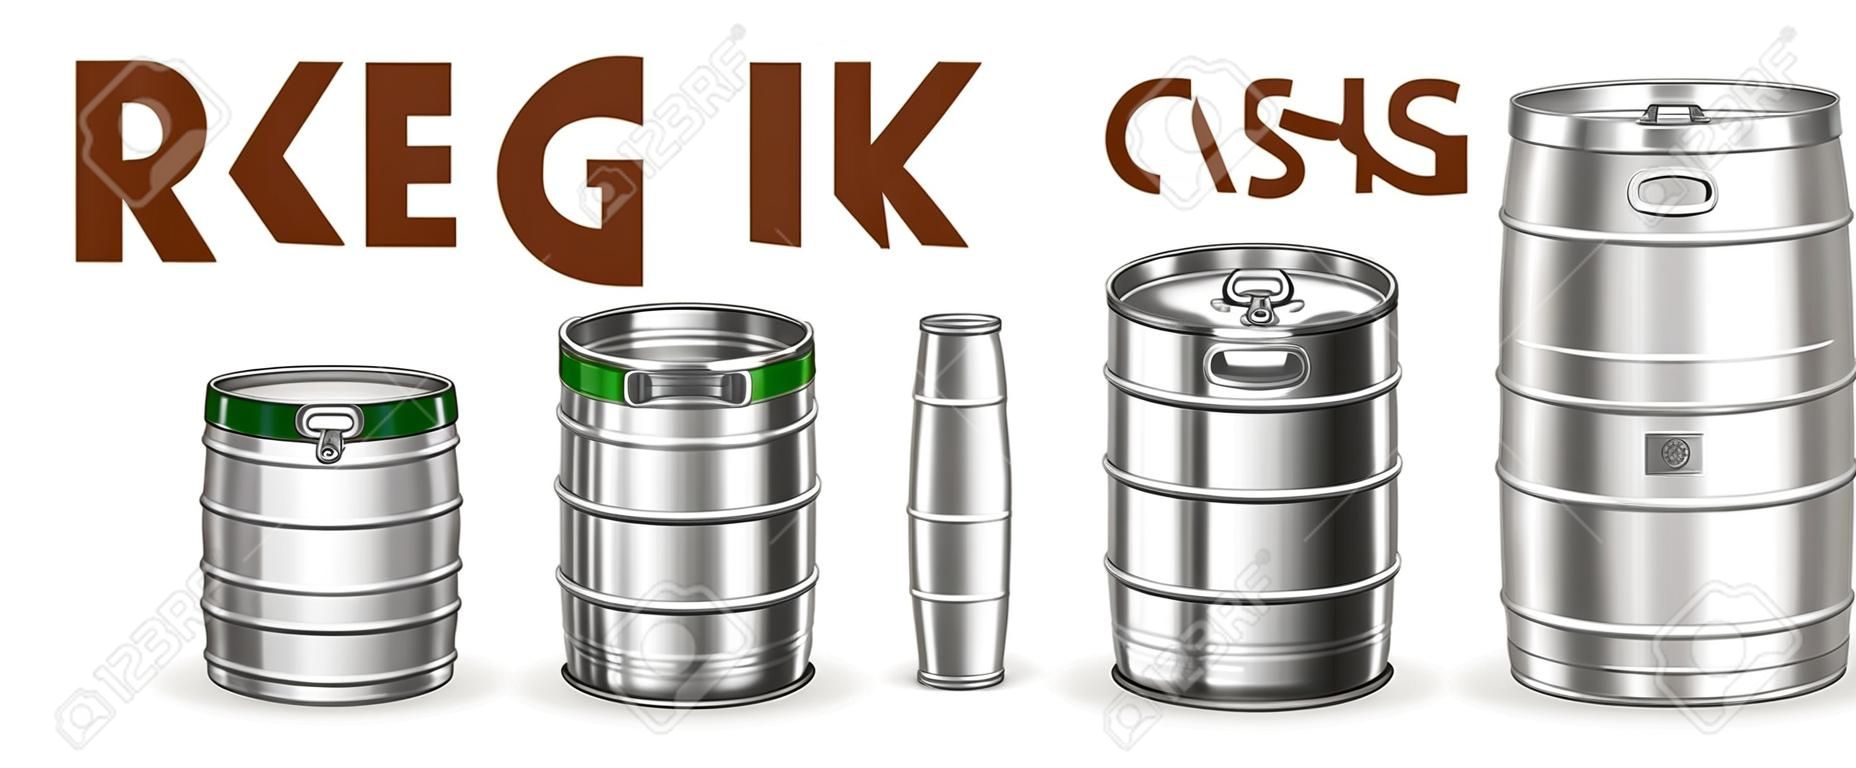 Collection Of Beverage Keg Barrel Cask Set Vector. Different Material And Size. Stainless Steel, Glass And Plastic Container For Storage And Botteling Alcoholic Drink. Realistic 3d Illustration